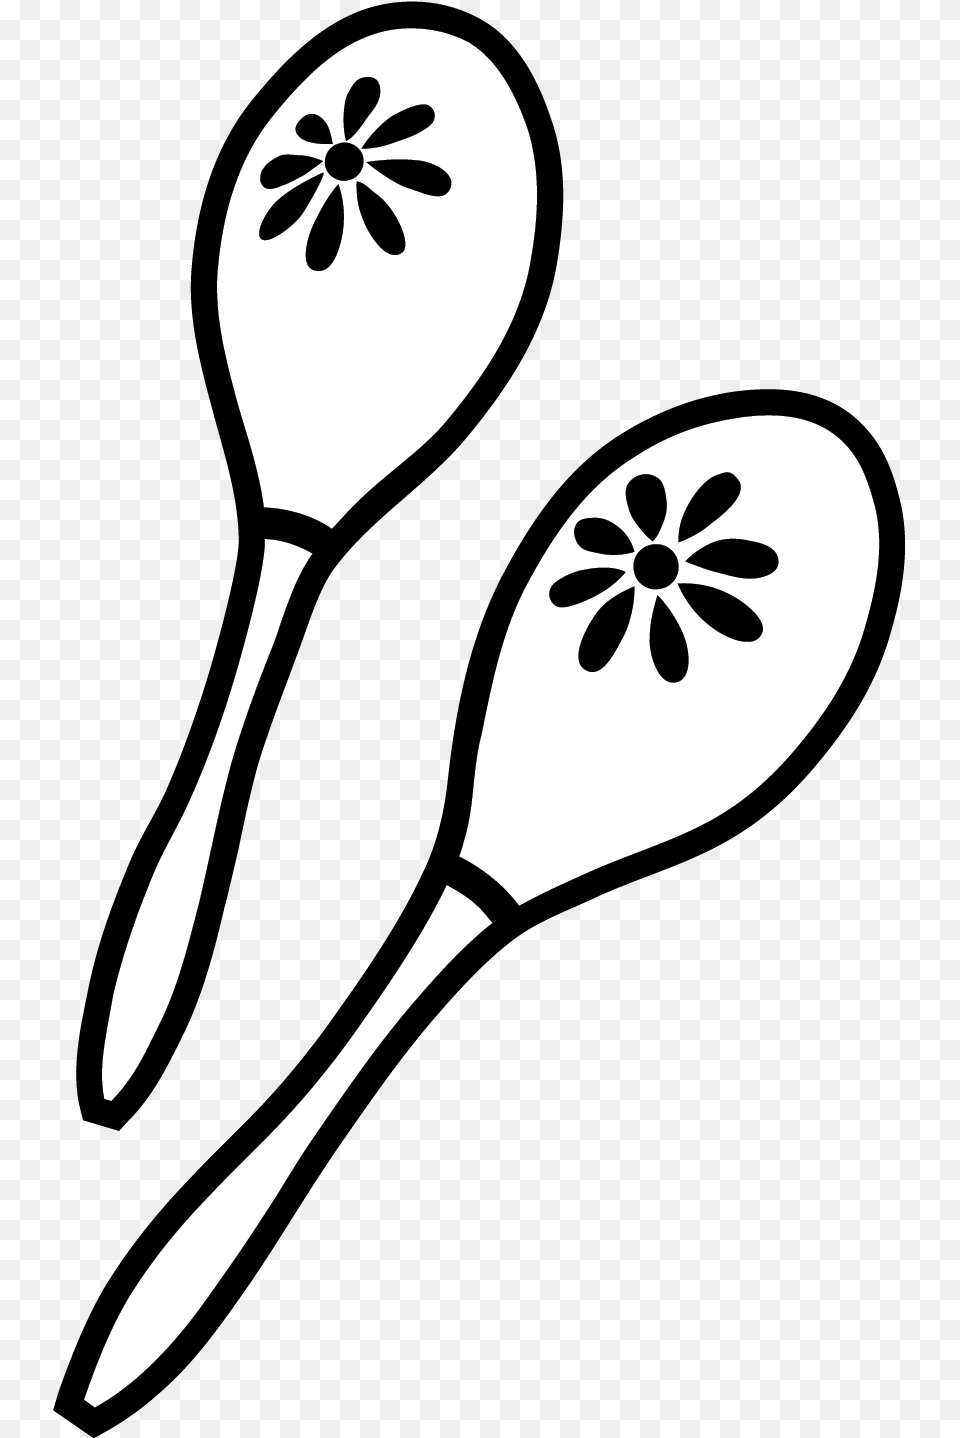 Music, Cutlery, Spoon, Maraca, Musical Instrument Png